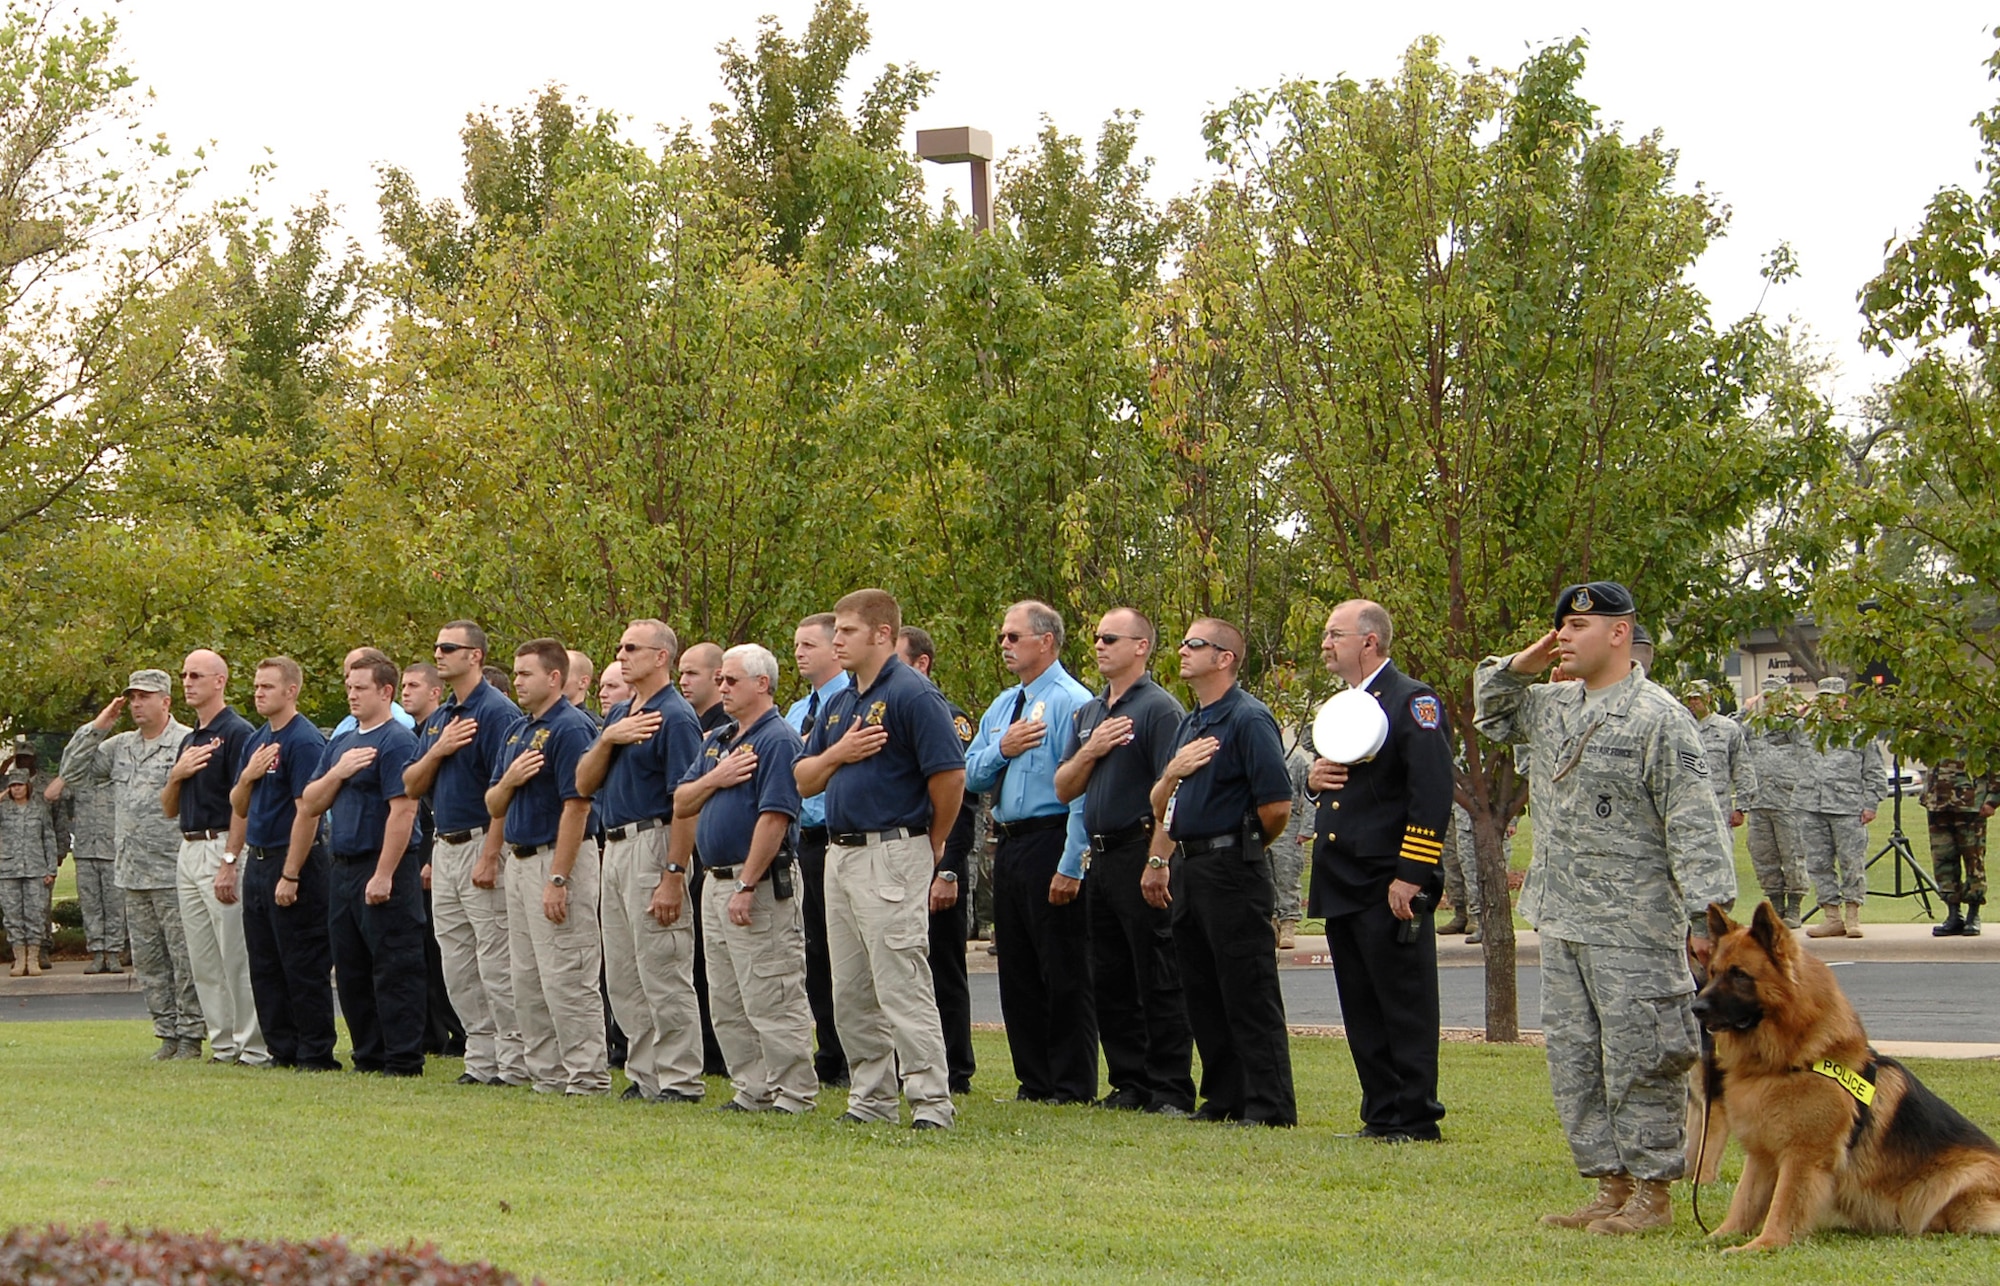 Public safety Airmen and local civilian safety representatives render salutes and salutations during a Patriot Day retreat ceremony, Sept. 11, 2009, at McConnell Air Force Base, Kan.  The 45-minute ceremony was designated to honor those who lost their lives during the Sept. 11, 2001, terrorist attacks. (U.S. Air Force photo/Senior Airman Anthony Mejia)